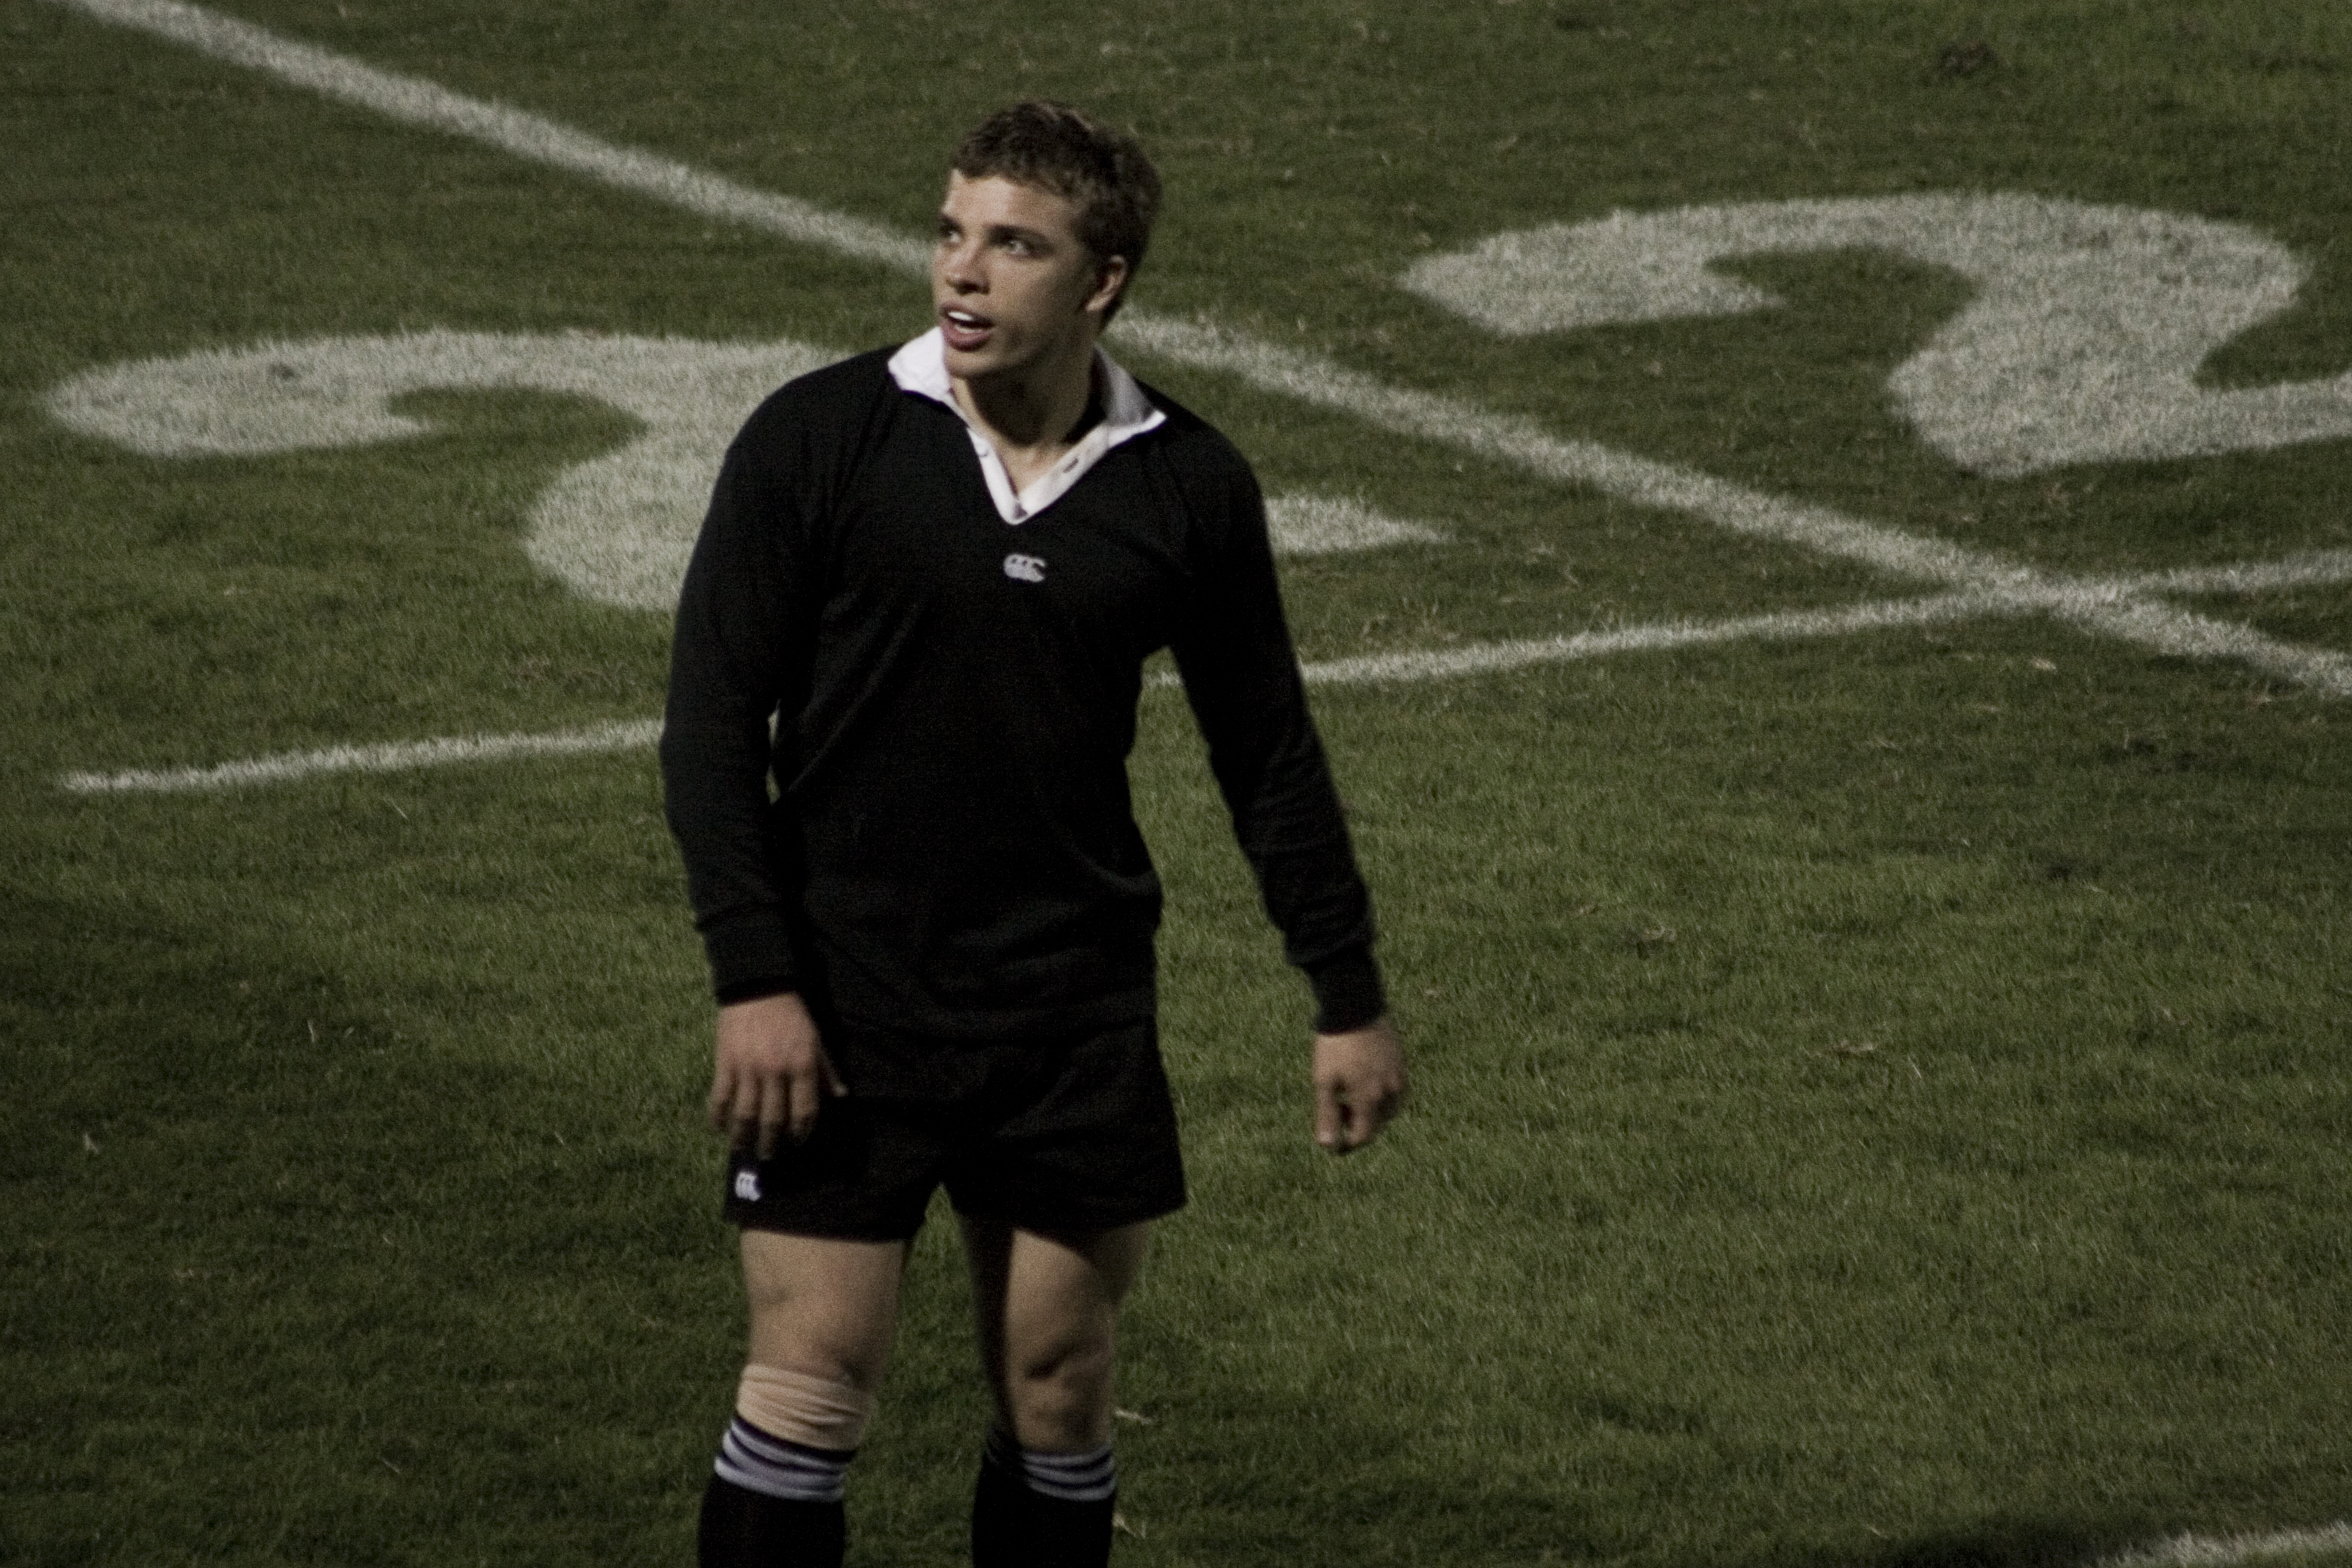 Julian Shaw portrays a troubled rugby player in an upcoming production.